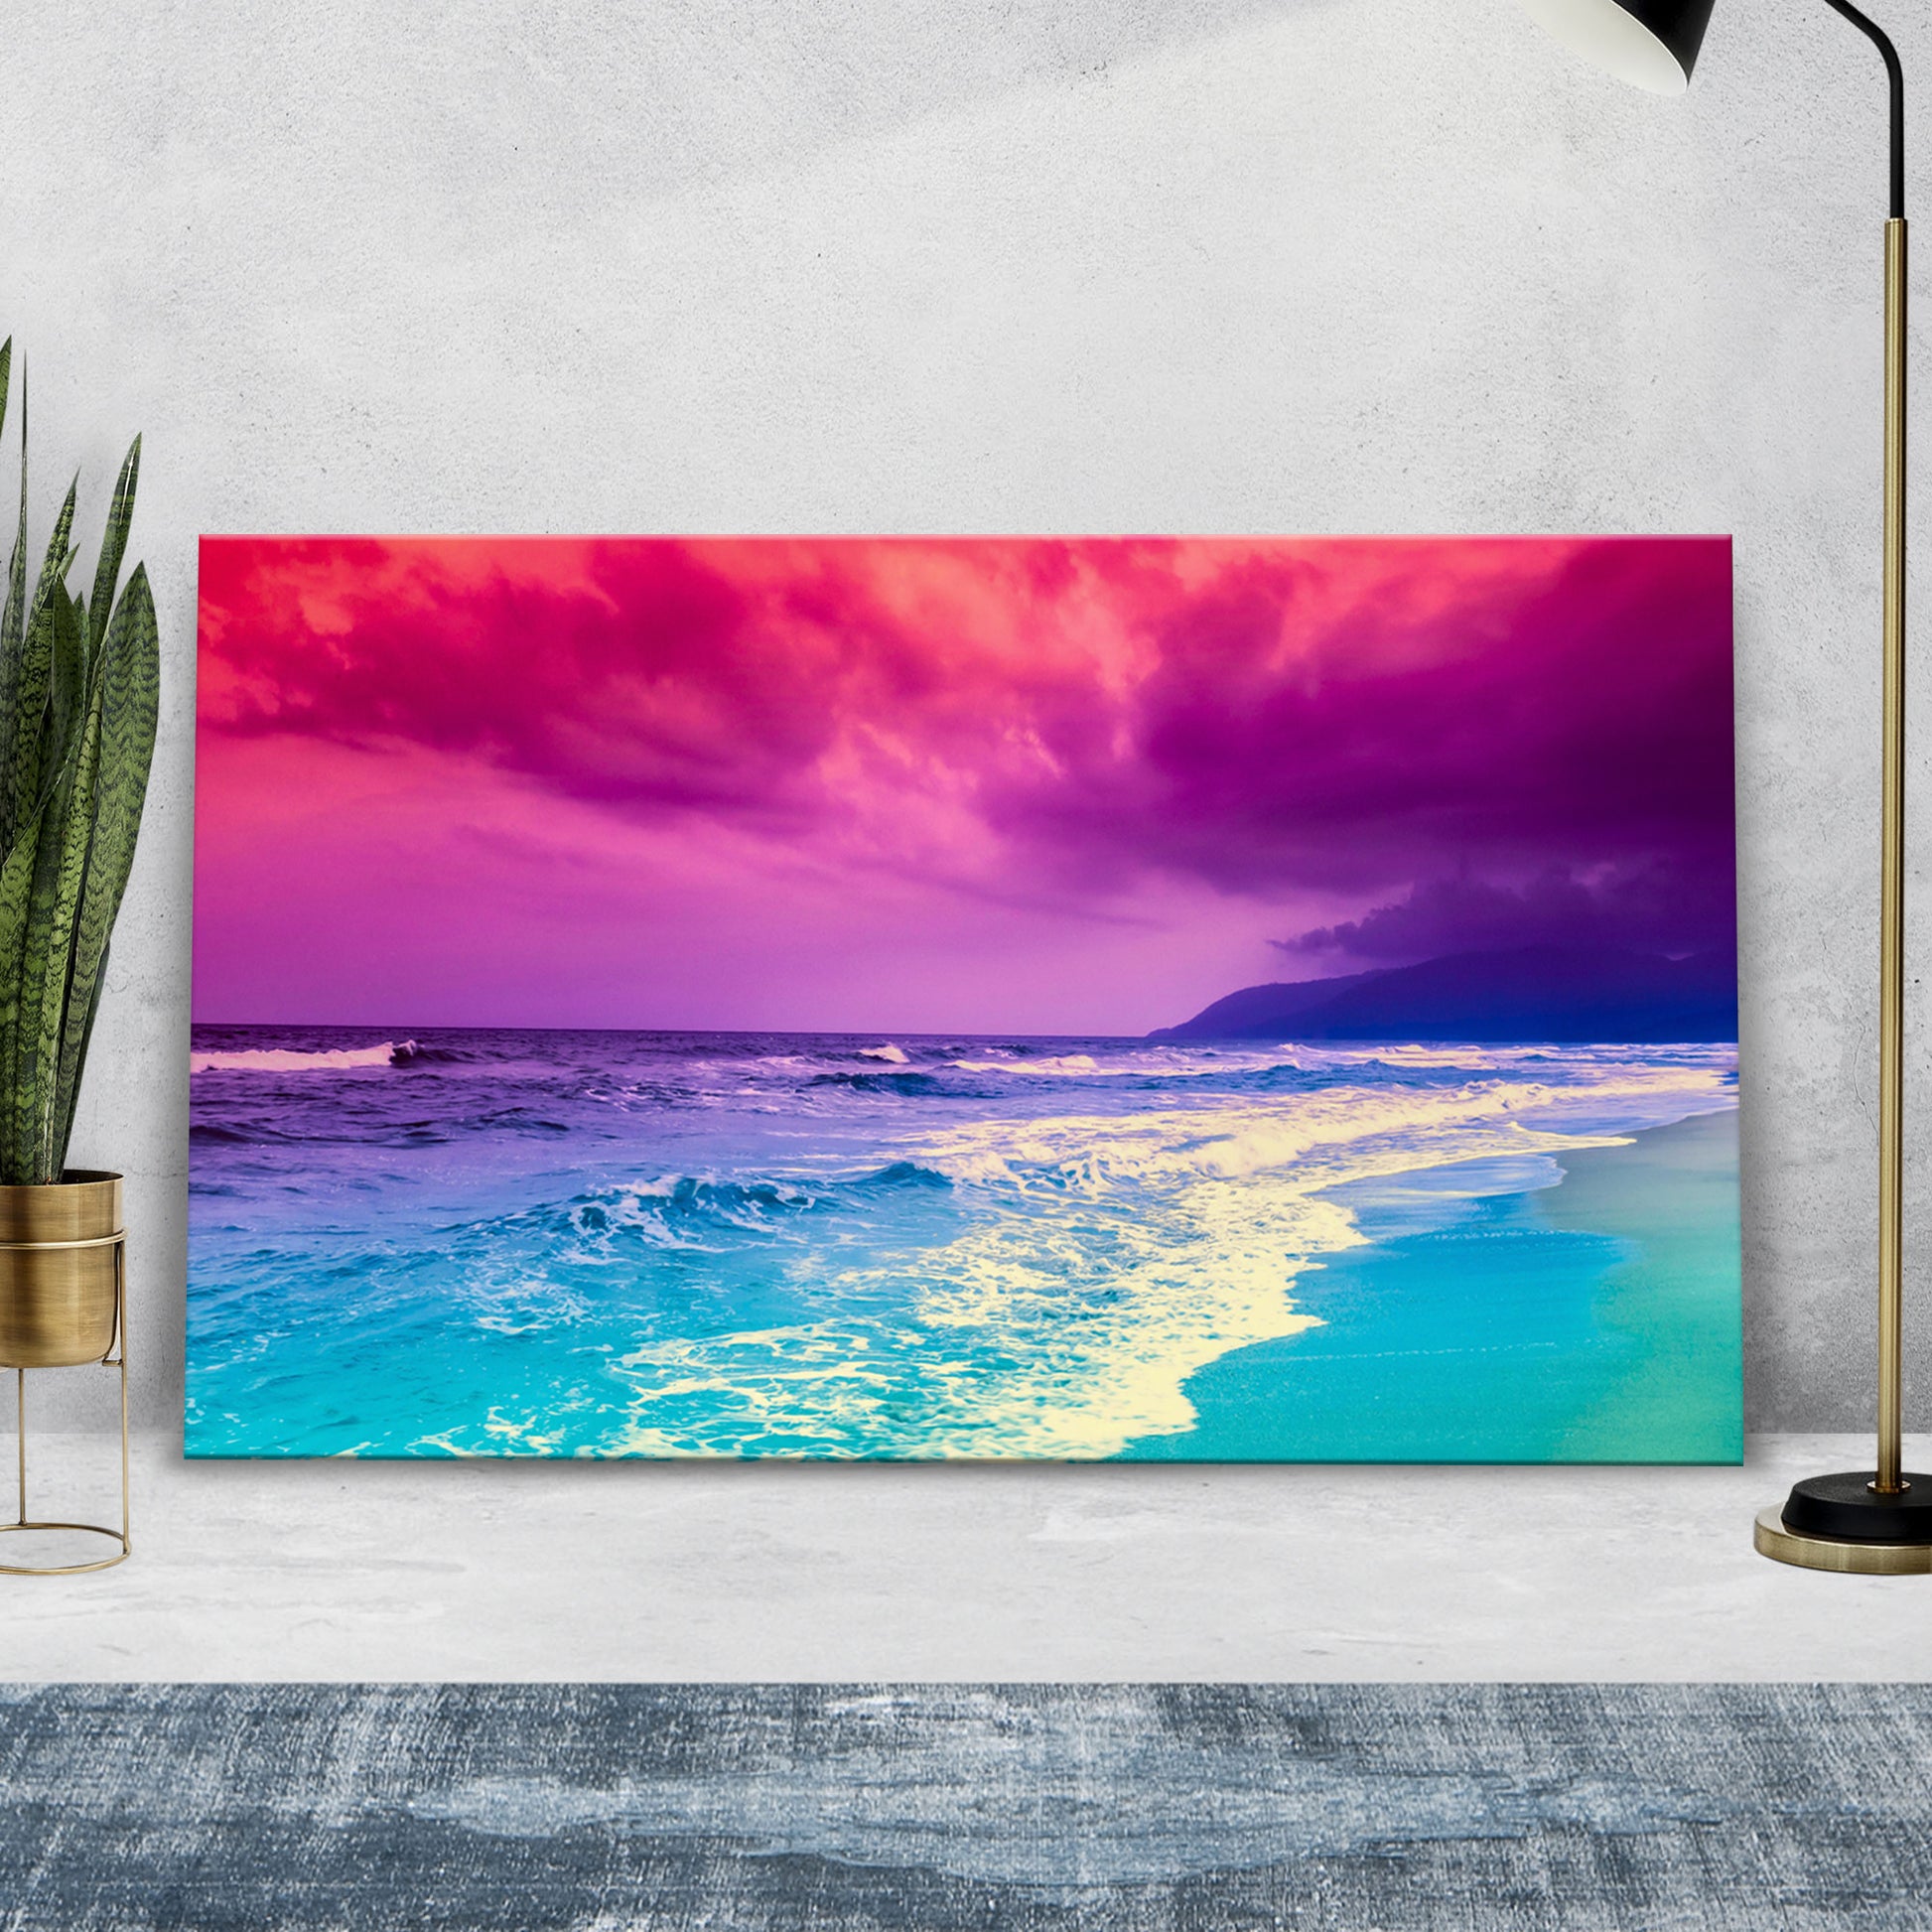 Blue Sea Under The Purple Sky Canvas Wall Art - Image by Tailored Canvases